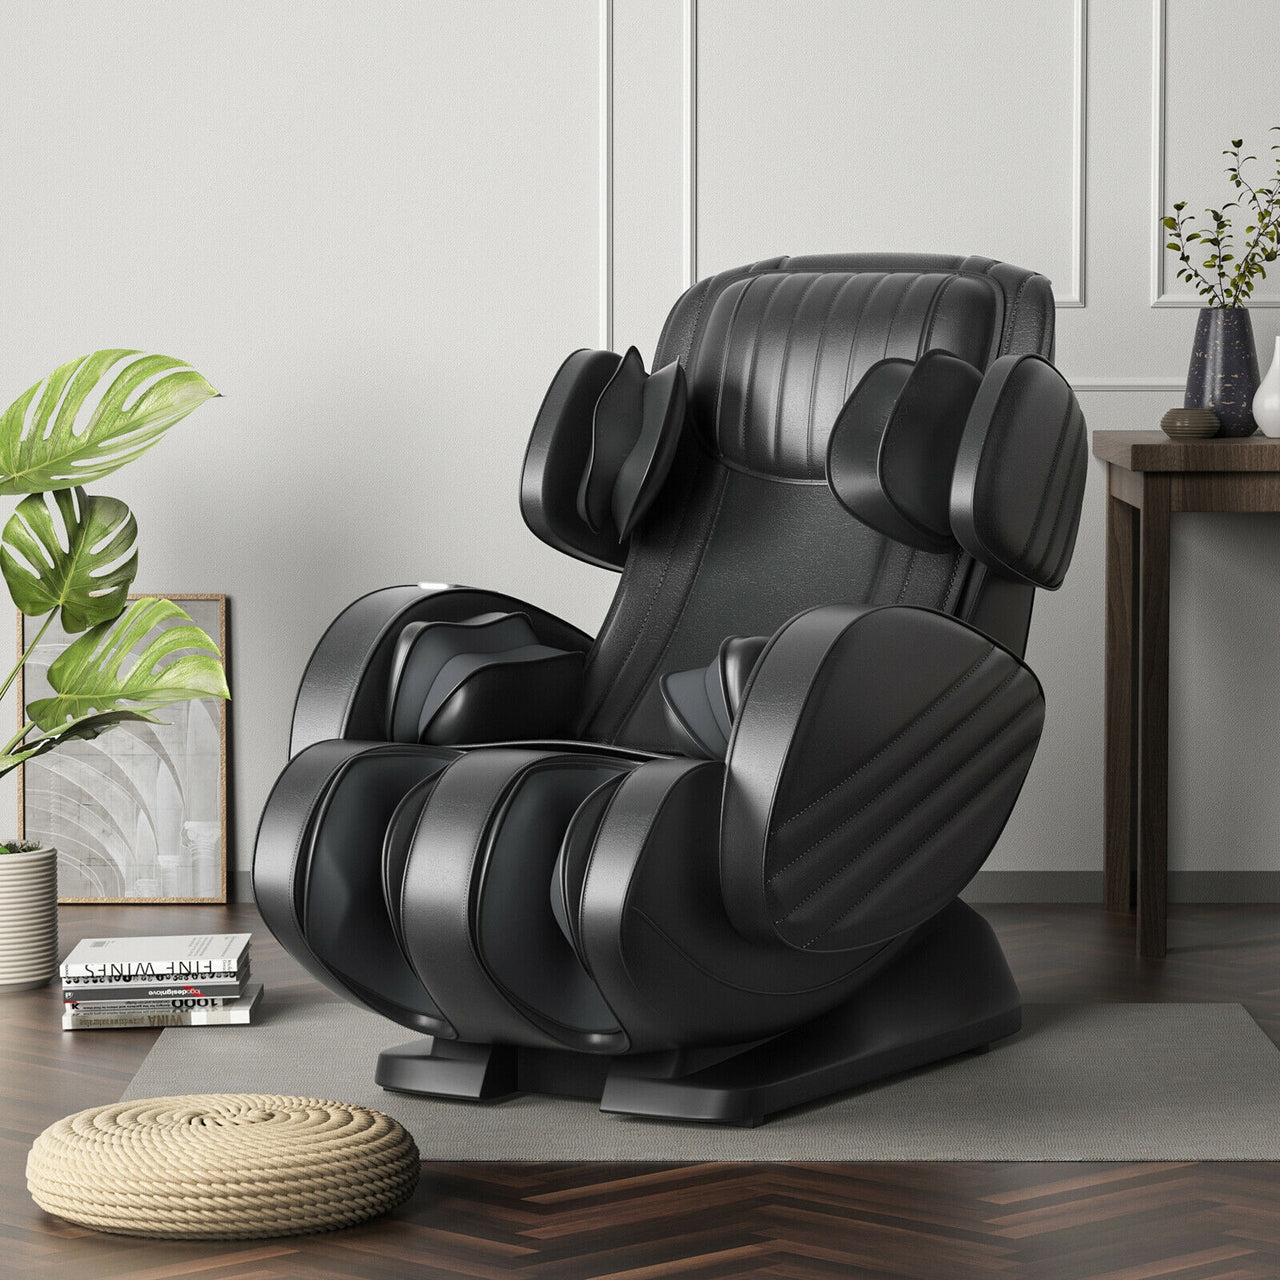 Dinky 07 - Massage Chair Recliner with SL Track Zero Gravity - Gallery View 1 of 12